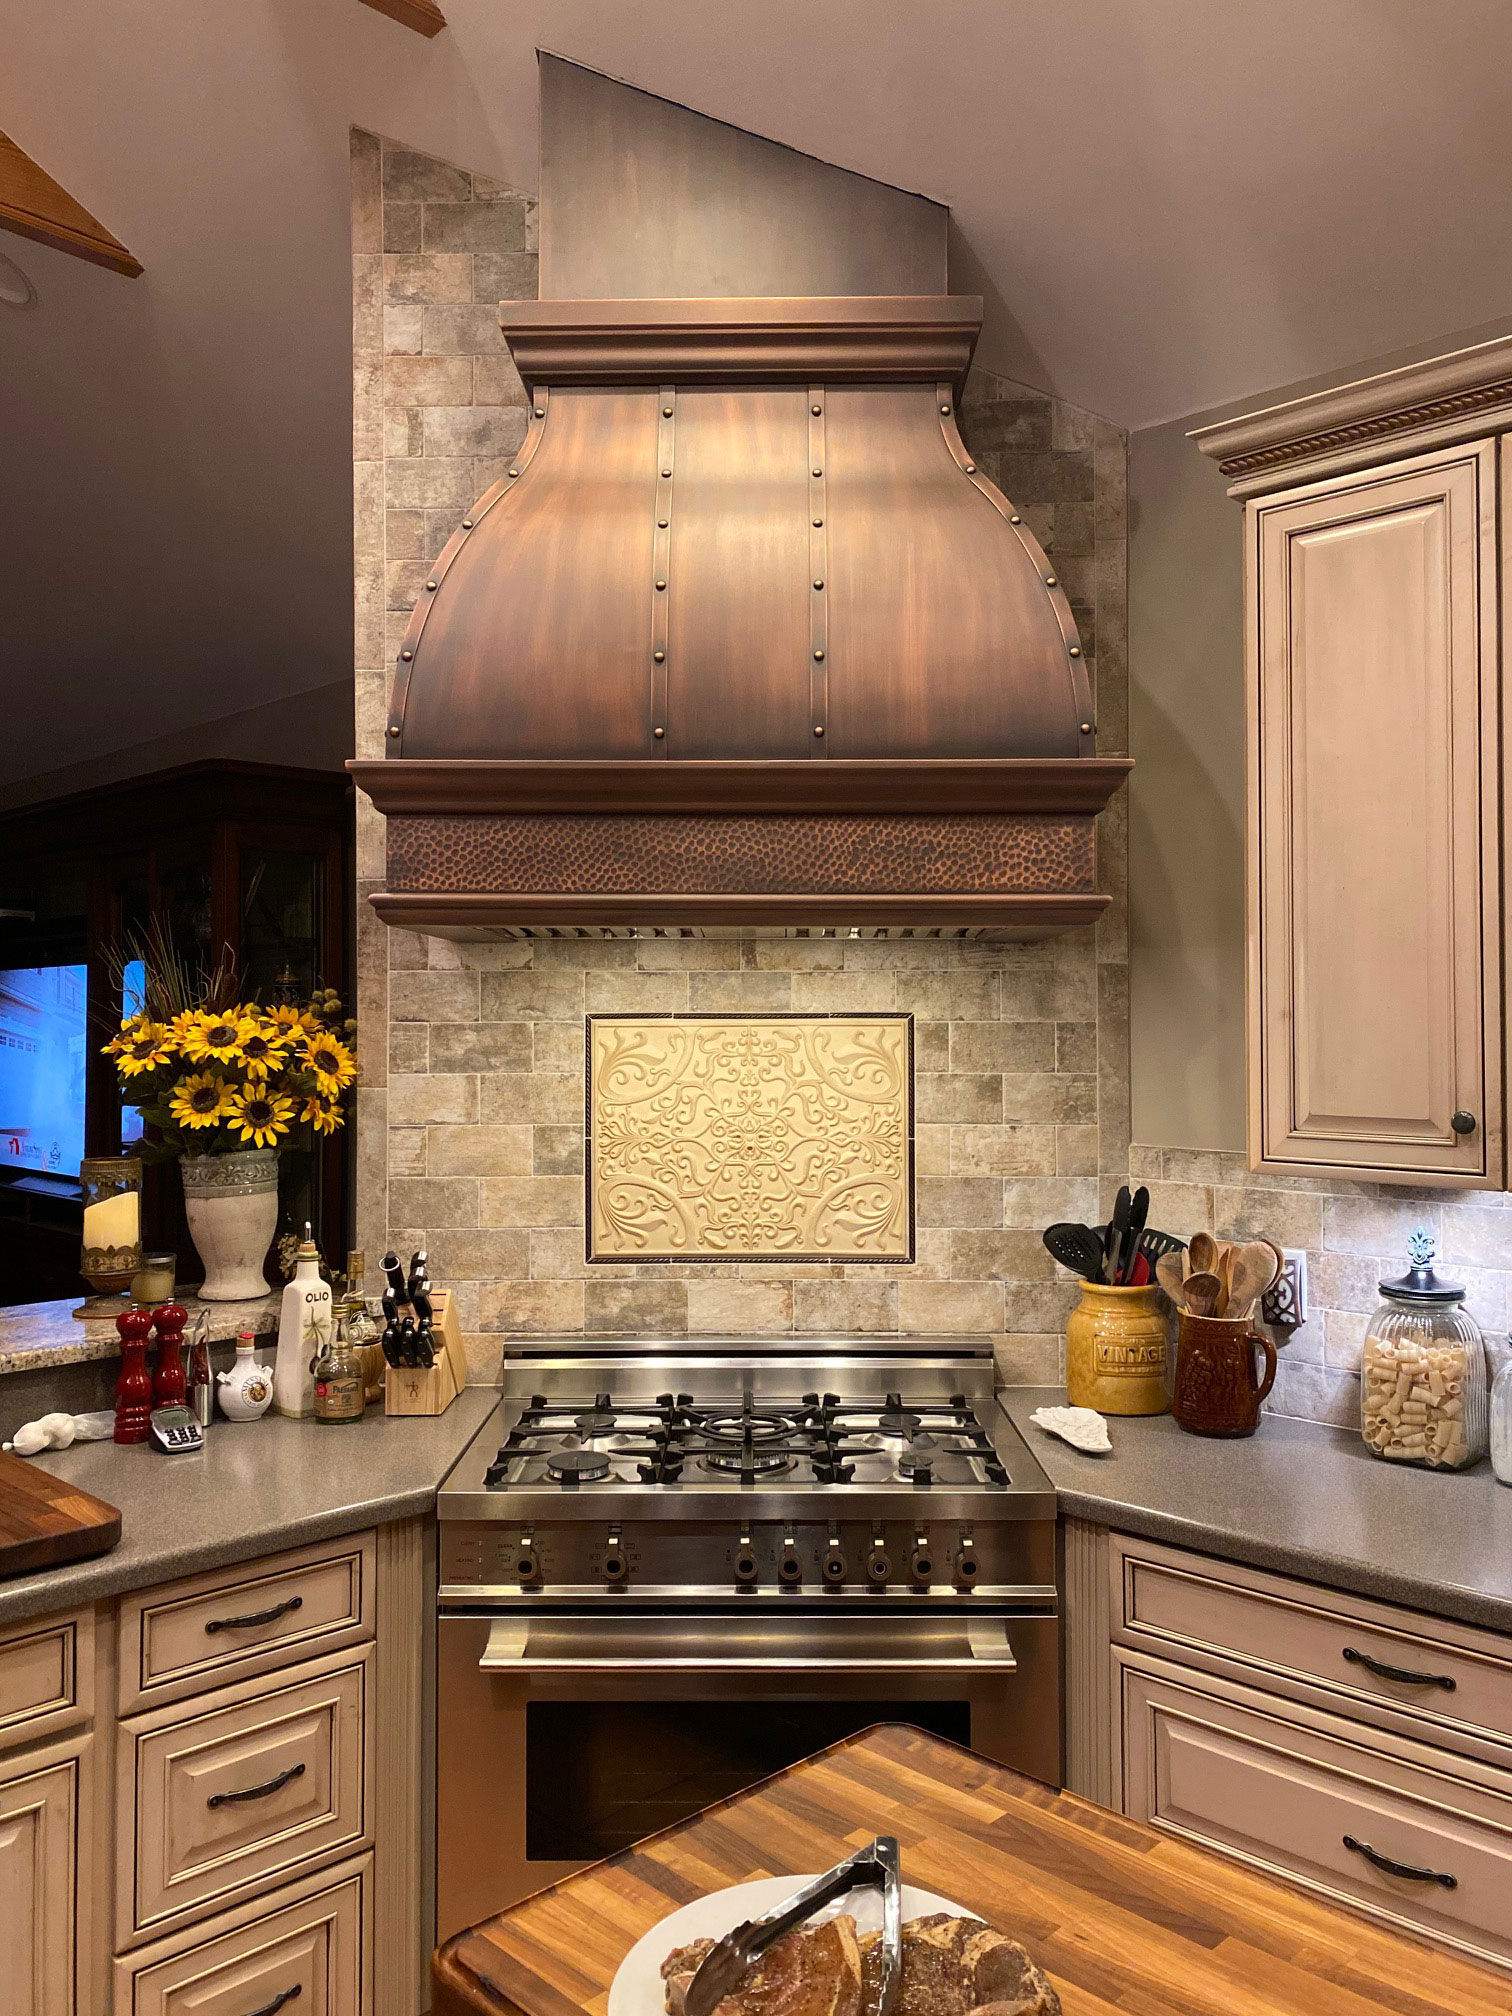 Latest kitchen design idea incorporates a sleek copper range hood, complementing the contemporary kitchen remodeling with its modern aesthetics